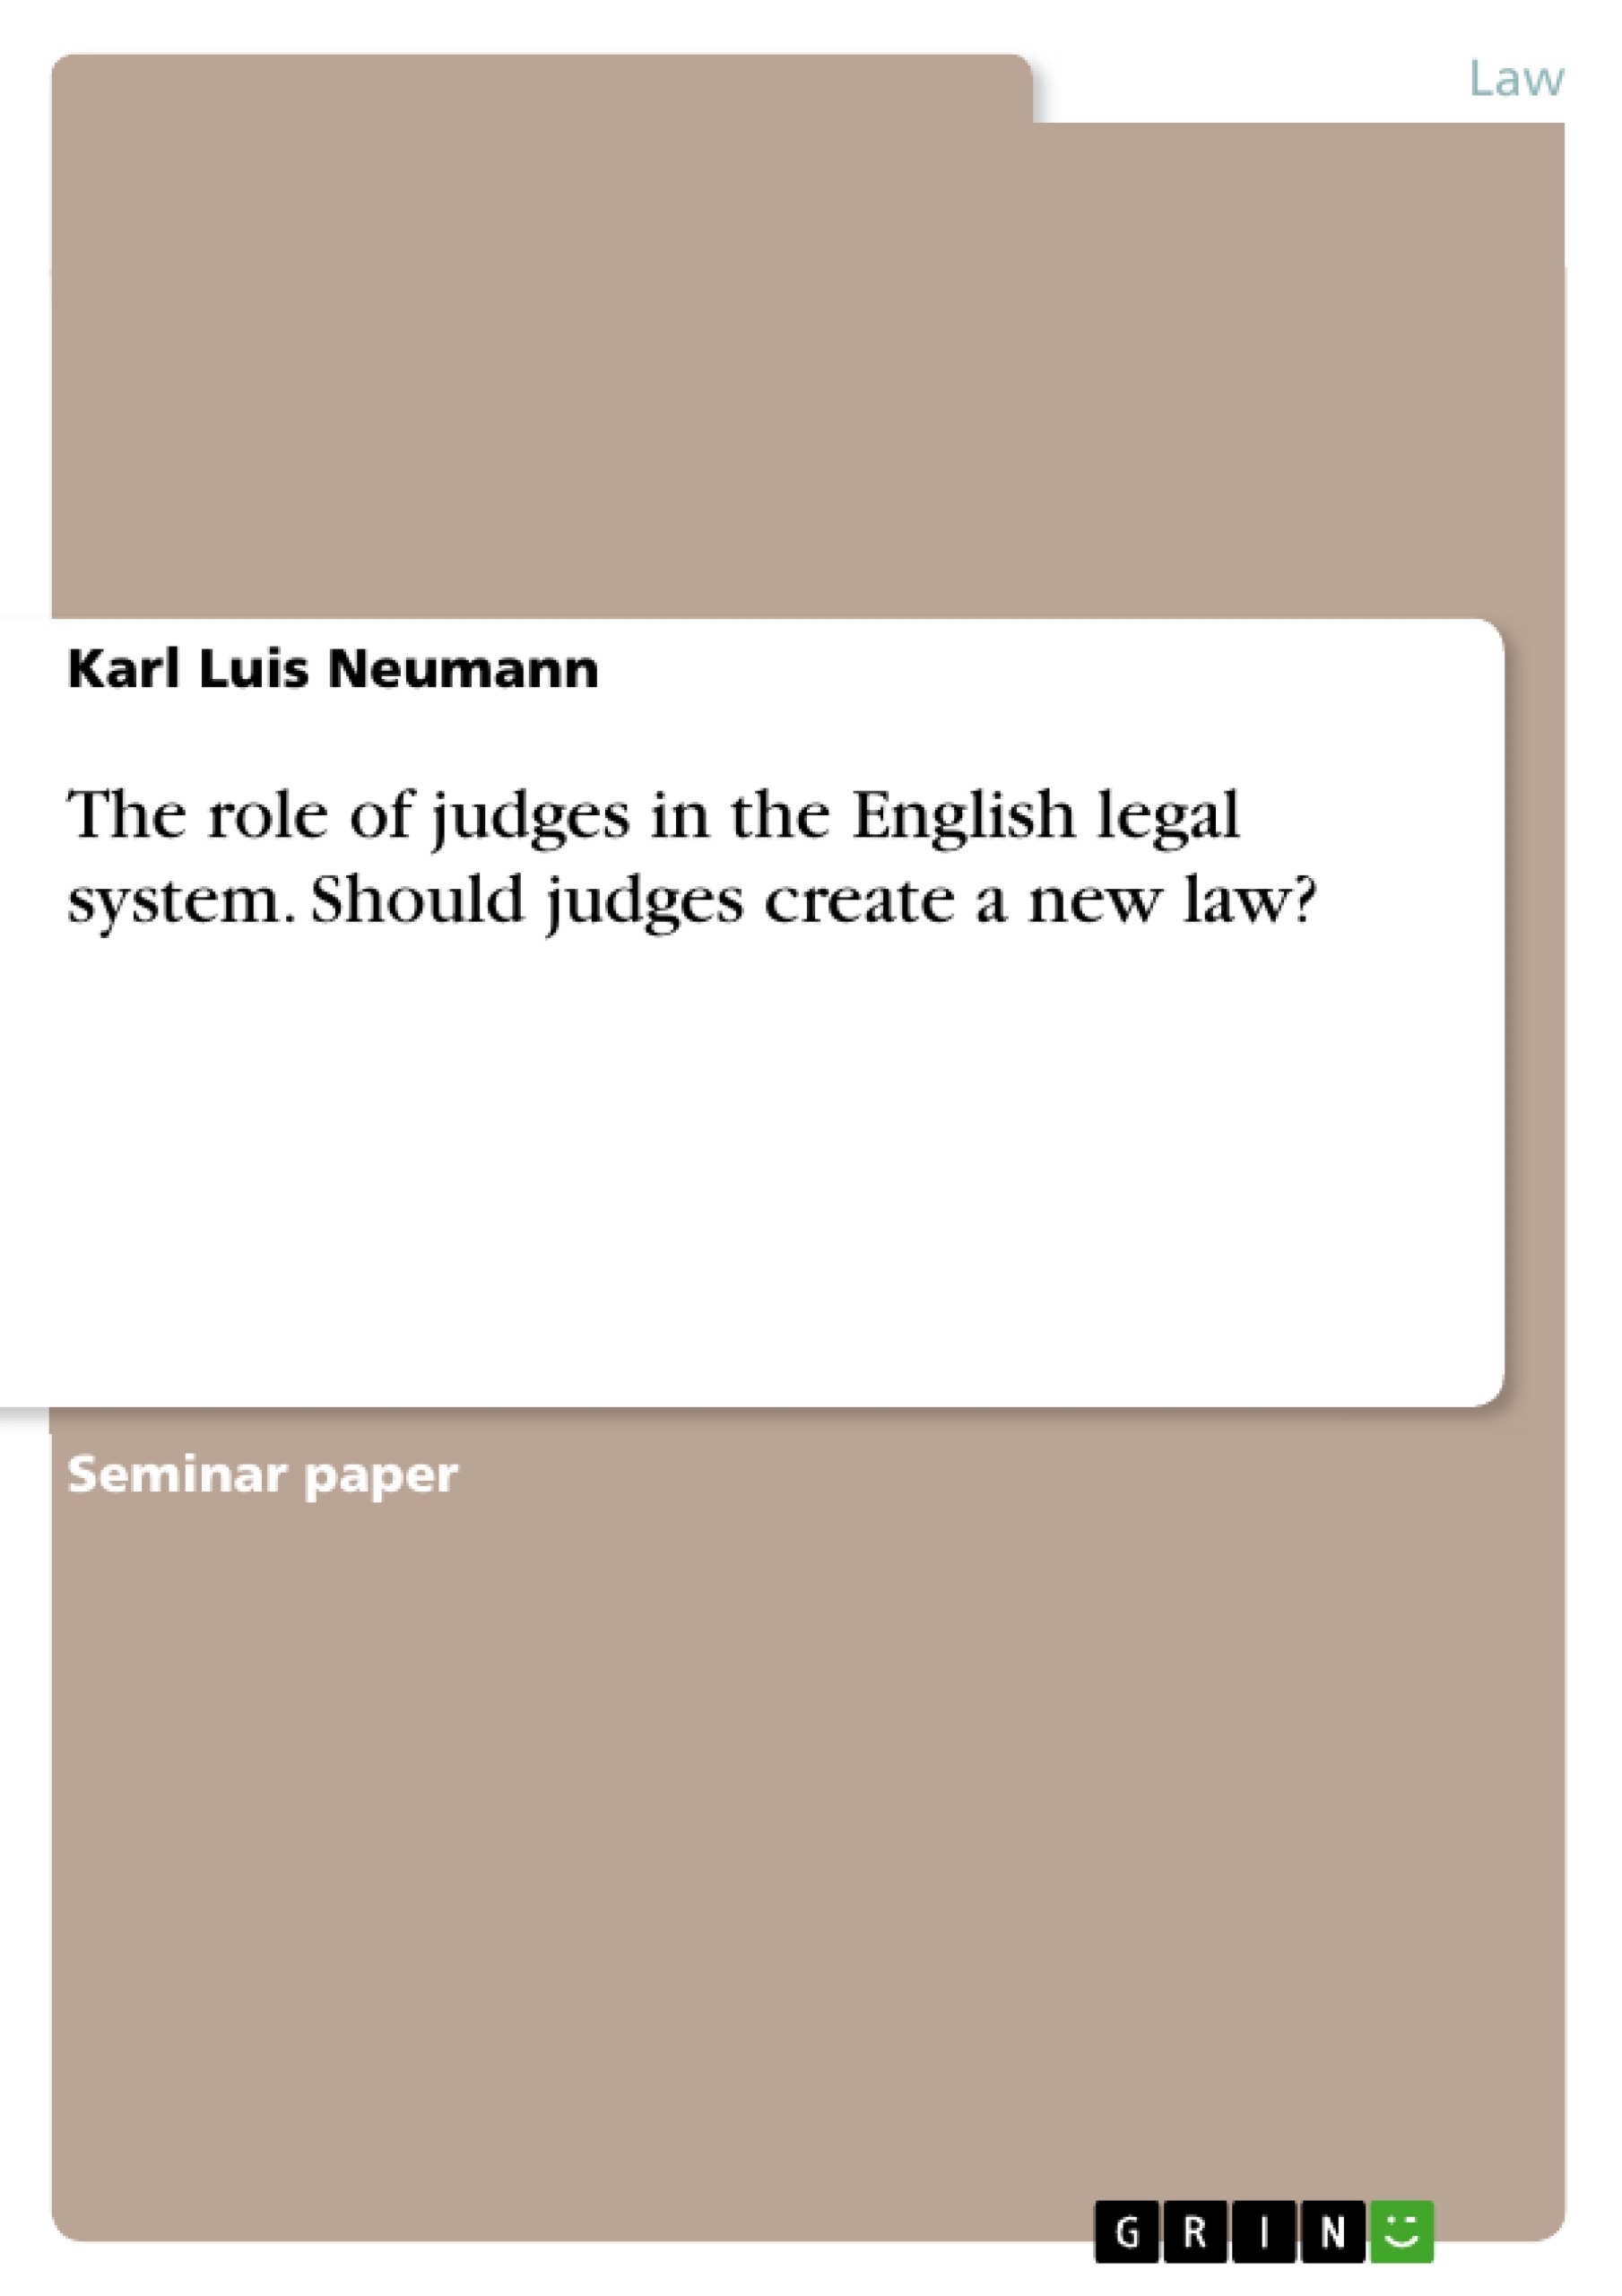 Título: The role of judges in the English legal system. Should judges create a new law?